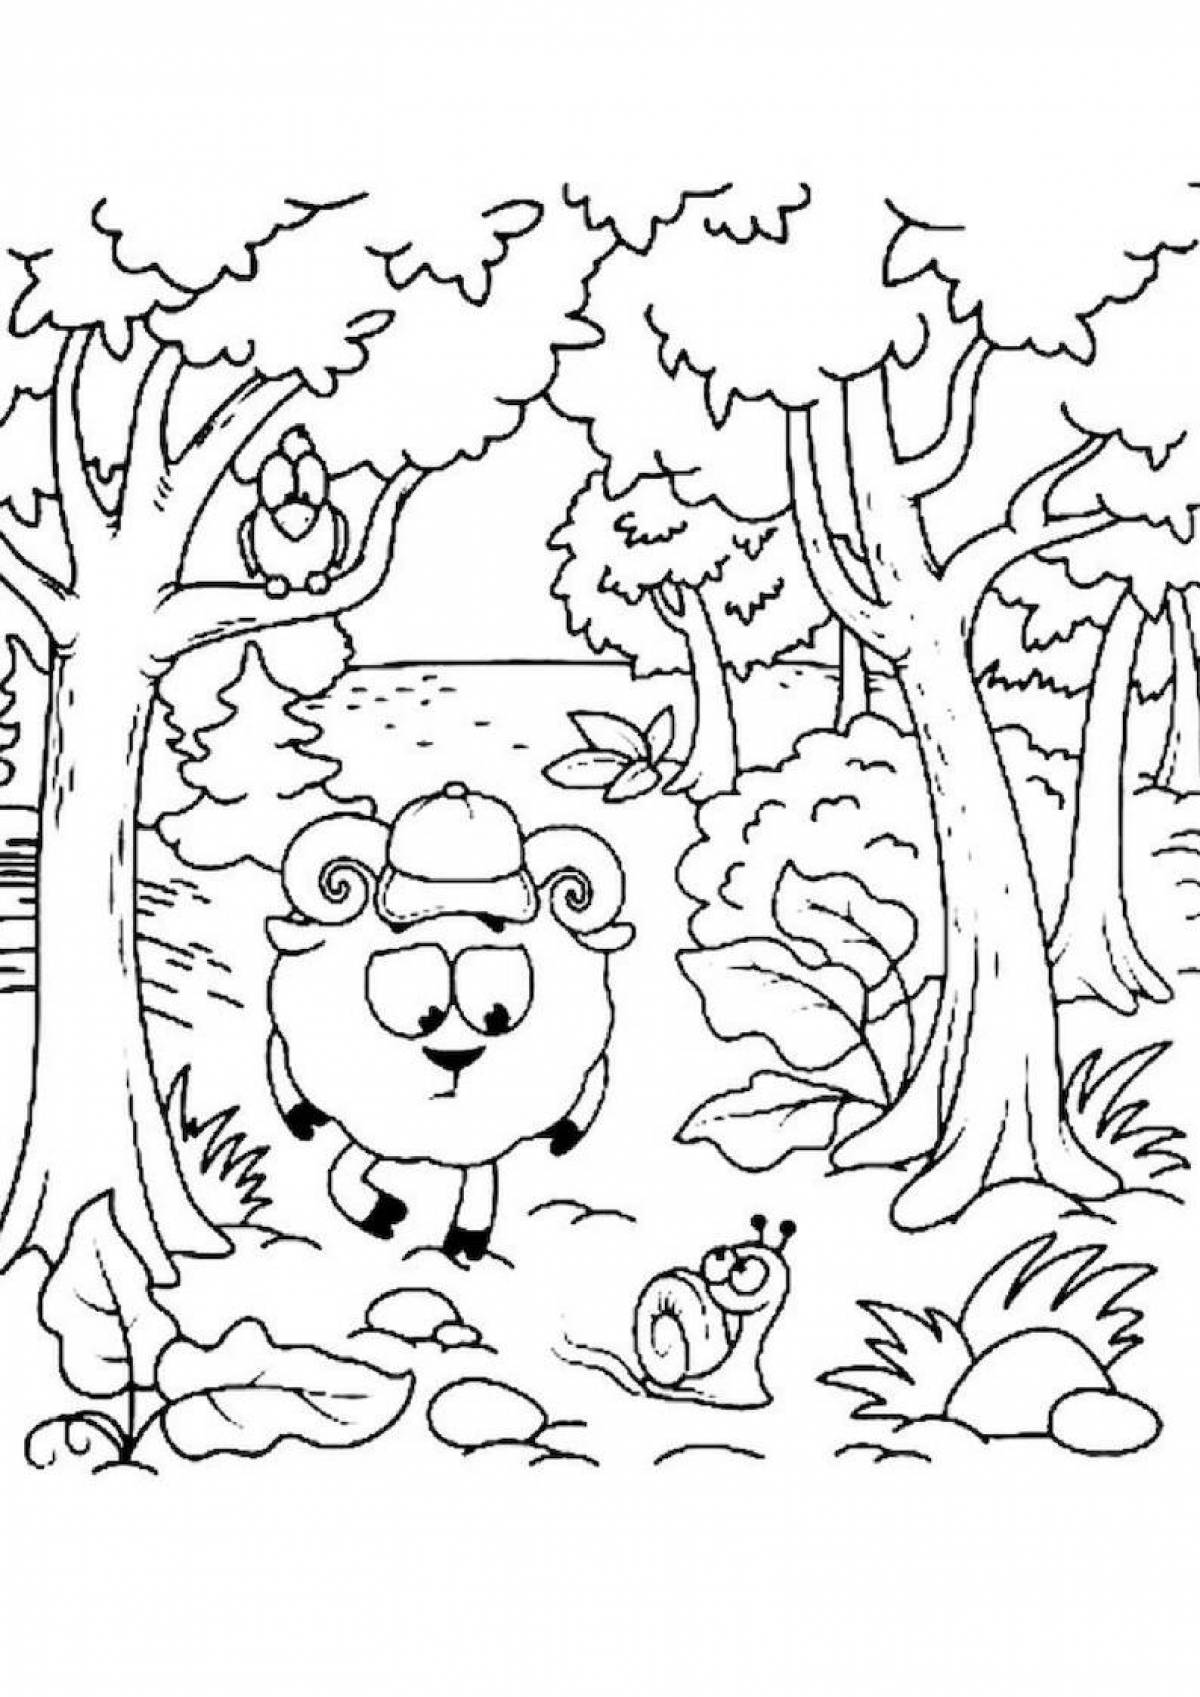 Coloring serene forest for kids